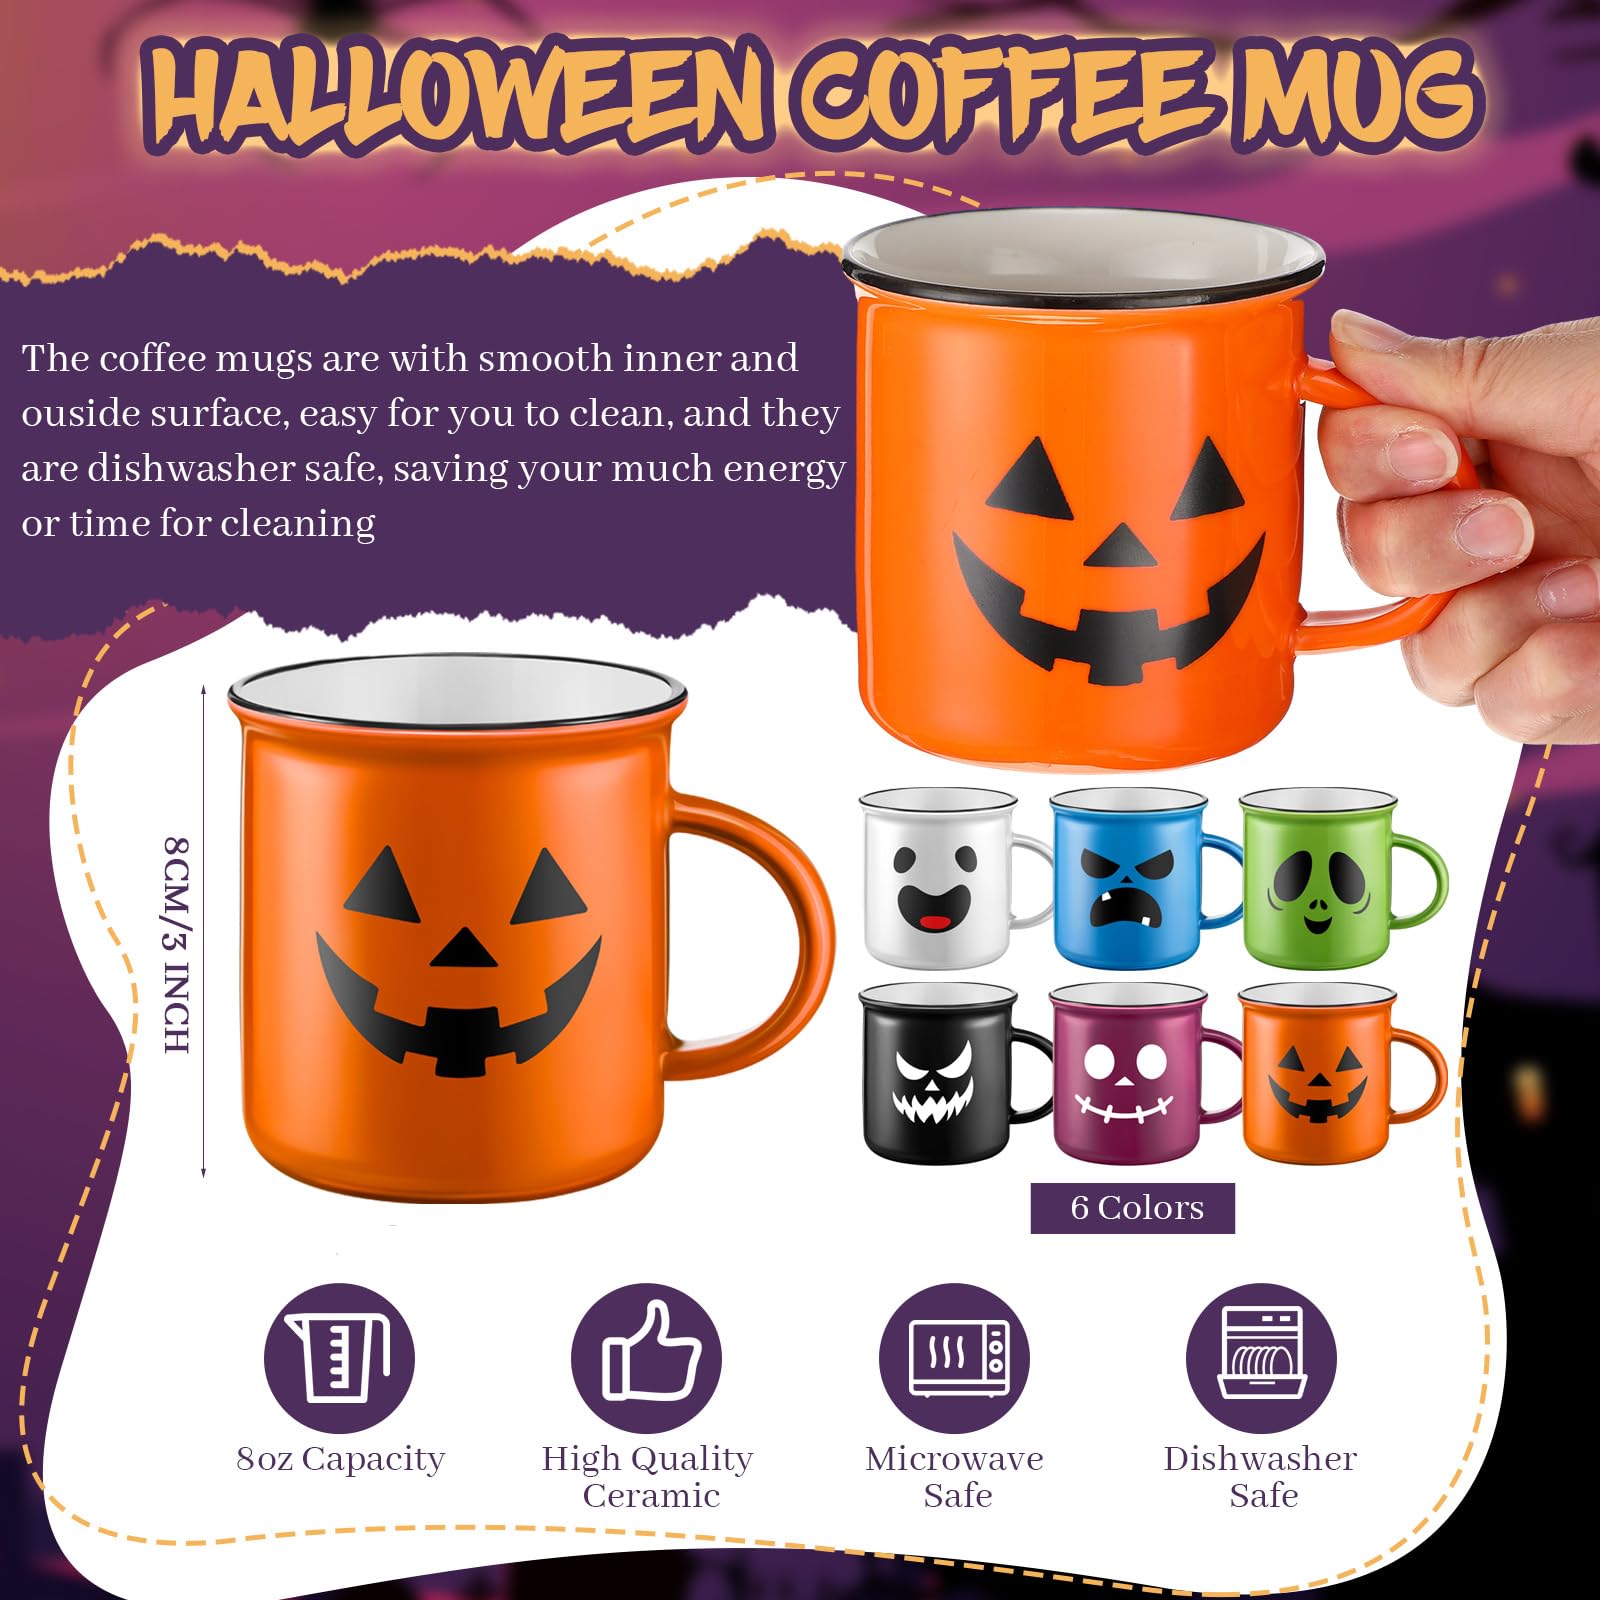 Bokon Halloween Coffee Mug Set of 6 Scary Pumpkin Ghost Spooky Smile Face Ceramic Cup Trick or Treat Gifts for Fall Party Decor Home Office Housewarming Novelty Accessories, 8.5 Oz, 6 Colors